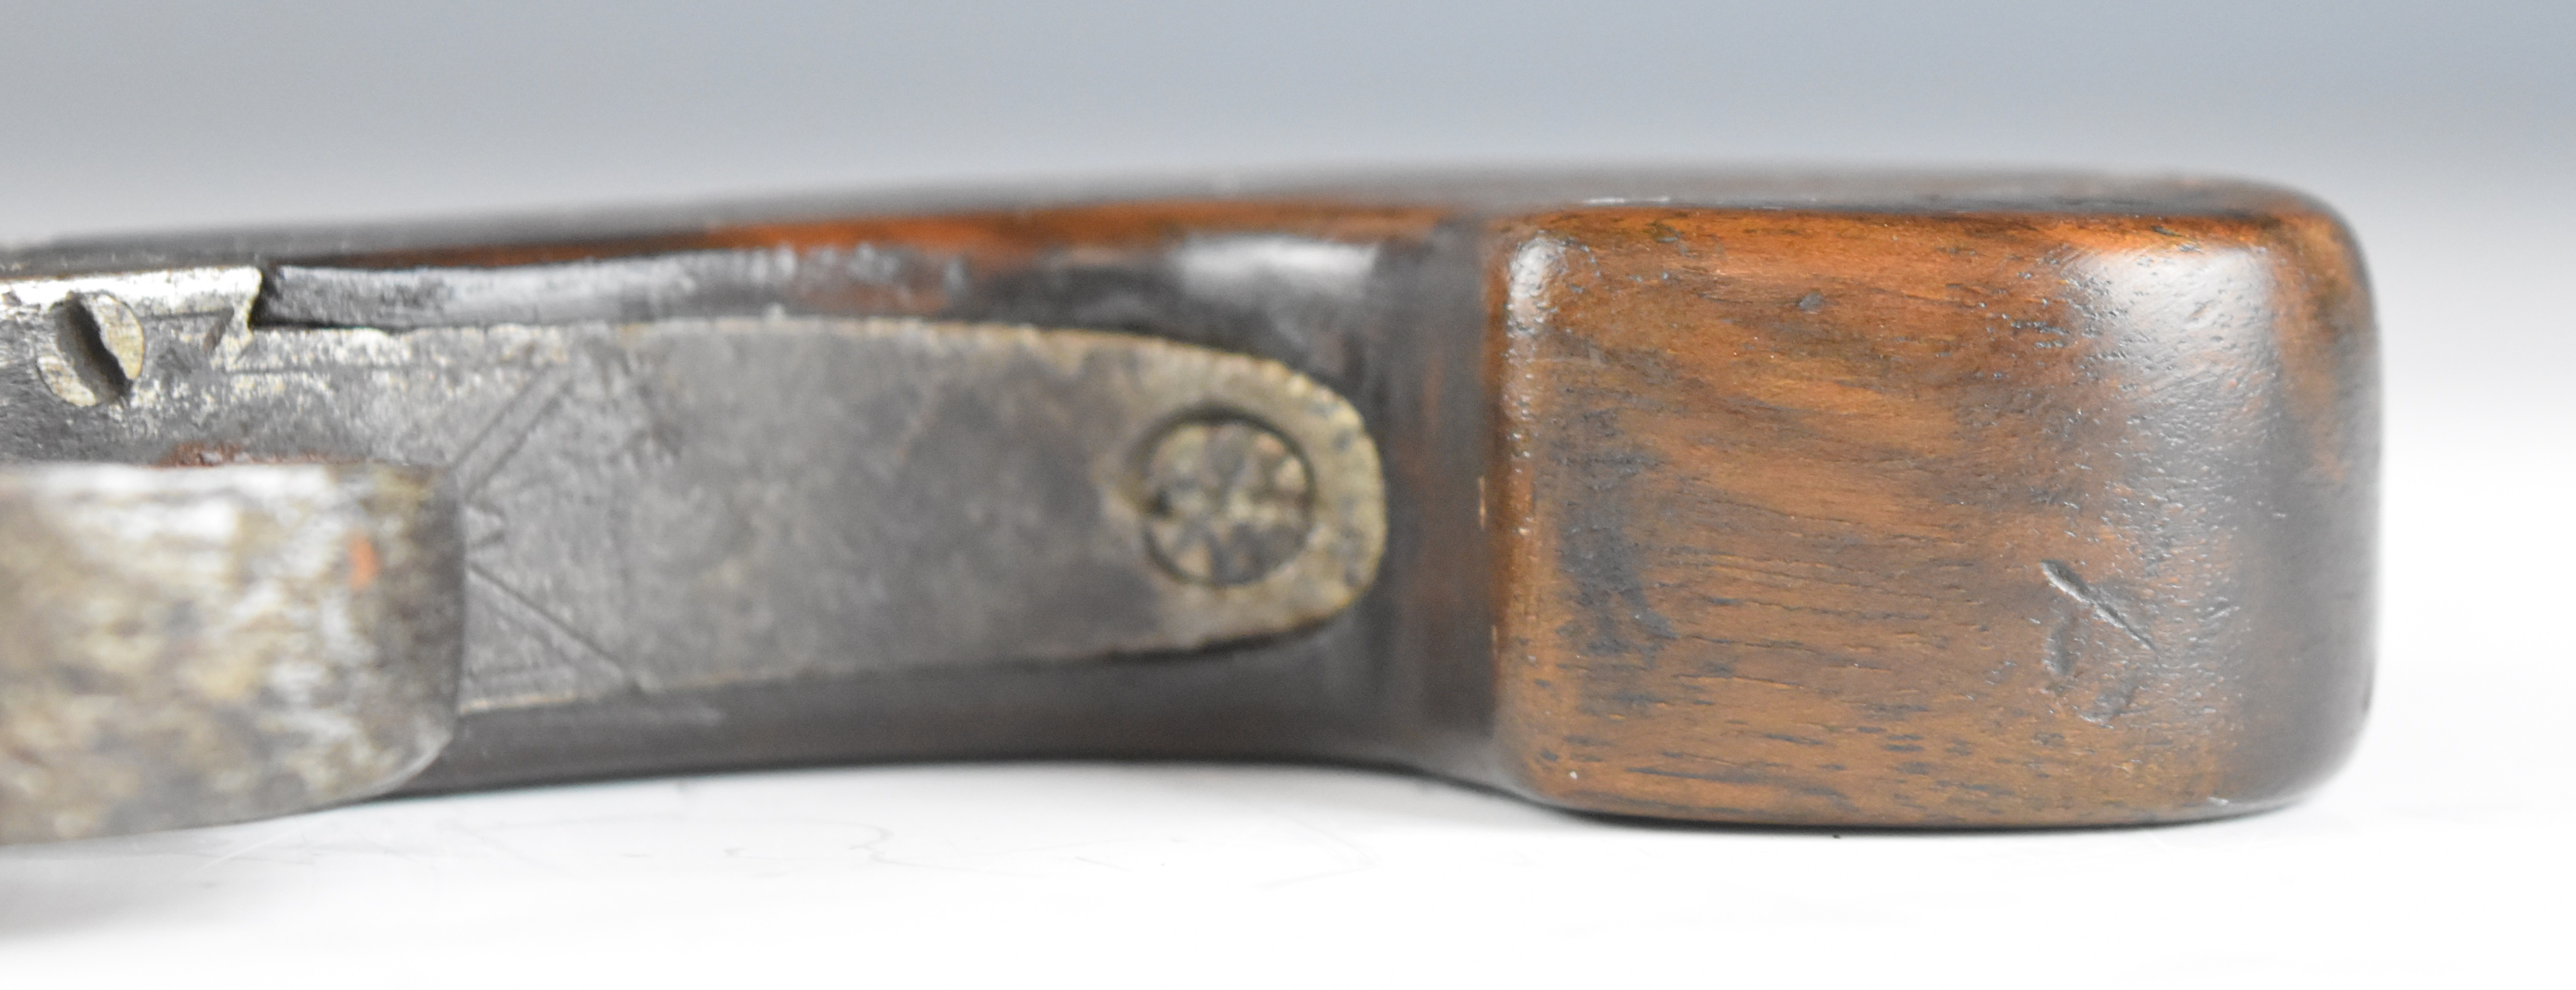 Unnamed 40 bore flintlock pocket pistol with engraved lock, wooden grip and 2 inch turn-off - Image 8 of 12